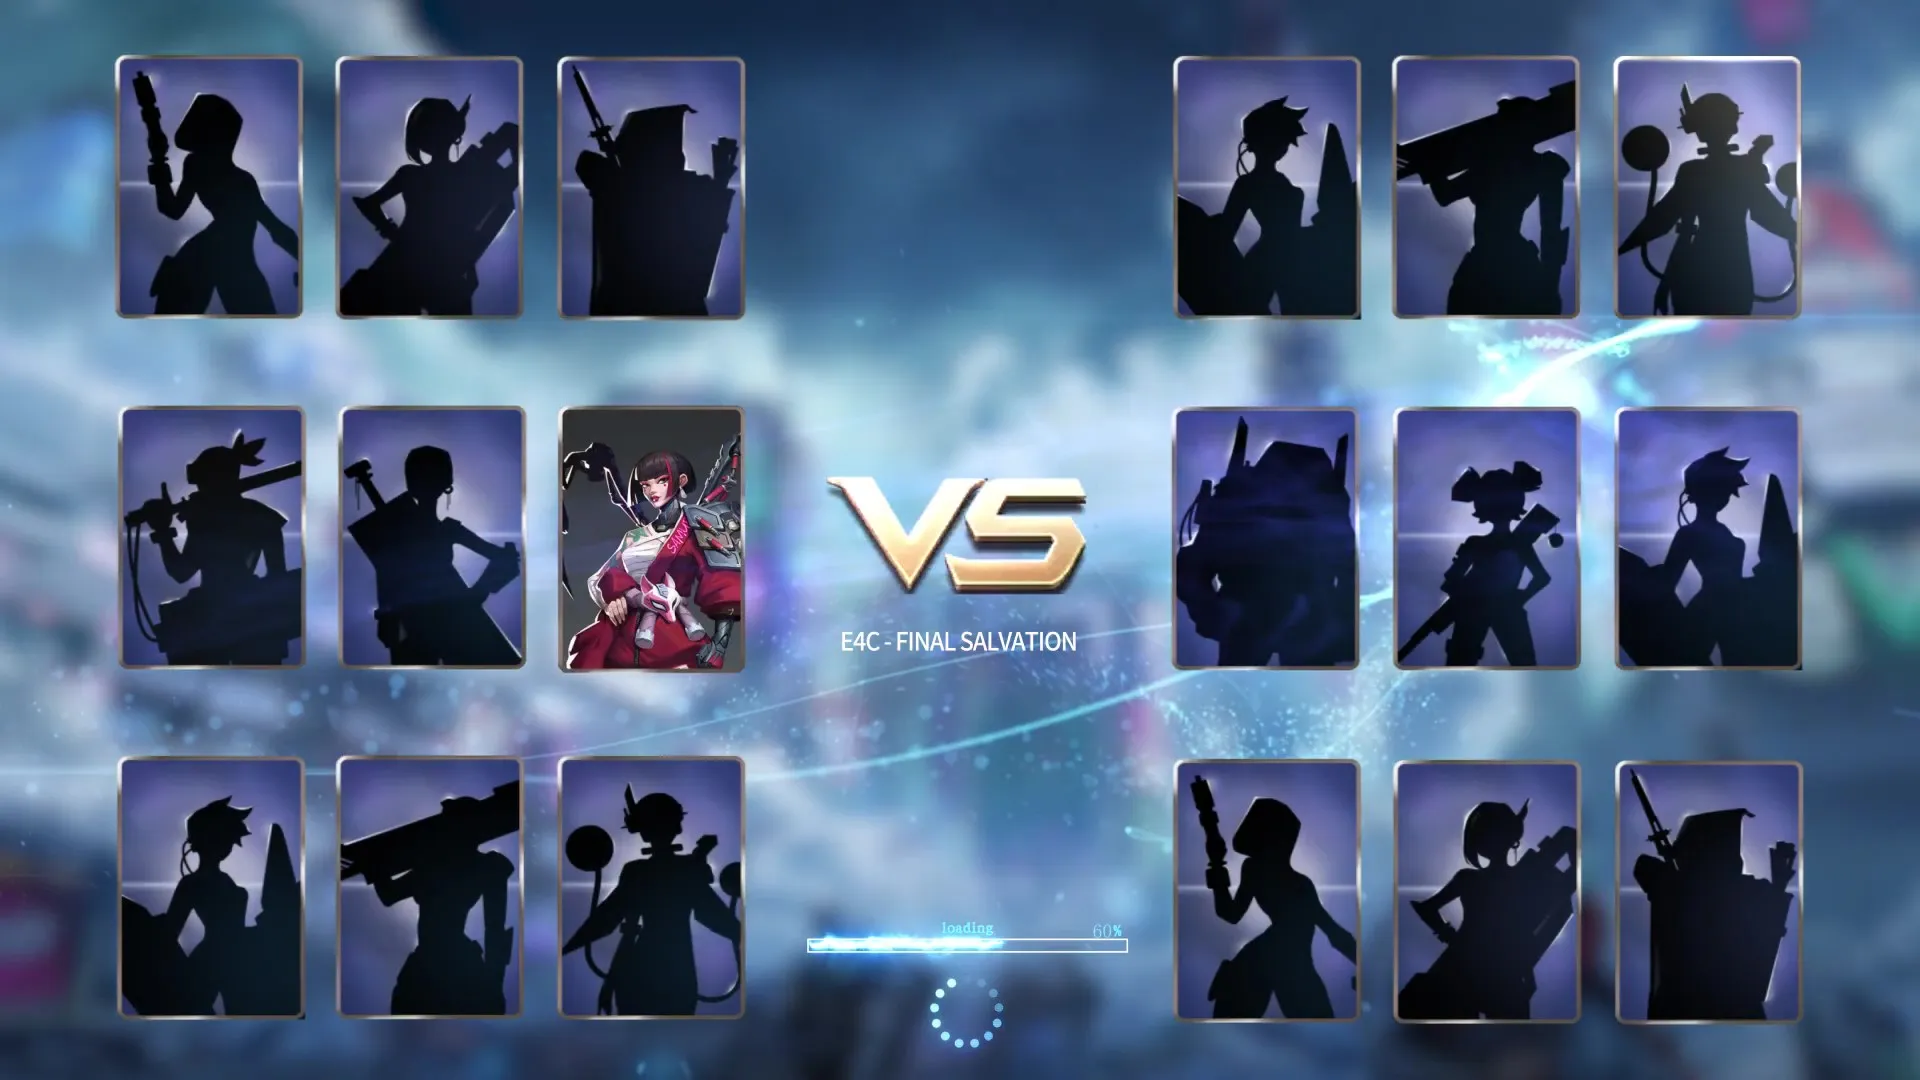 Each player has to select up to three Champions per match. The game loading screen displays all Champions of all 6 players. Players can control 2 at the same time in the game.